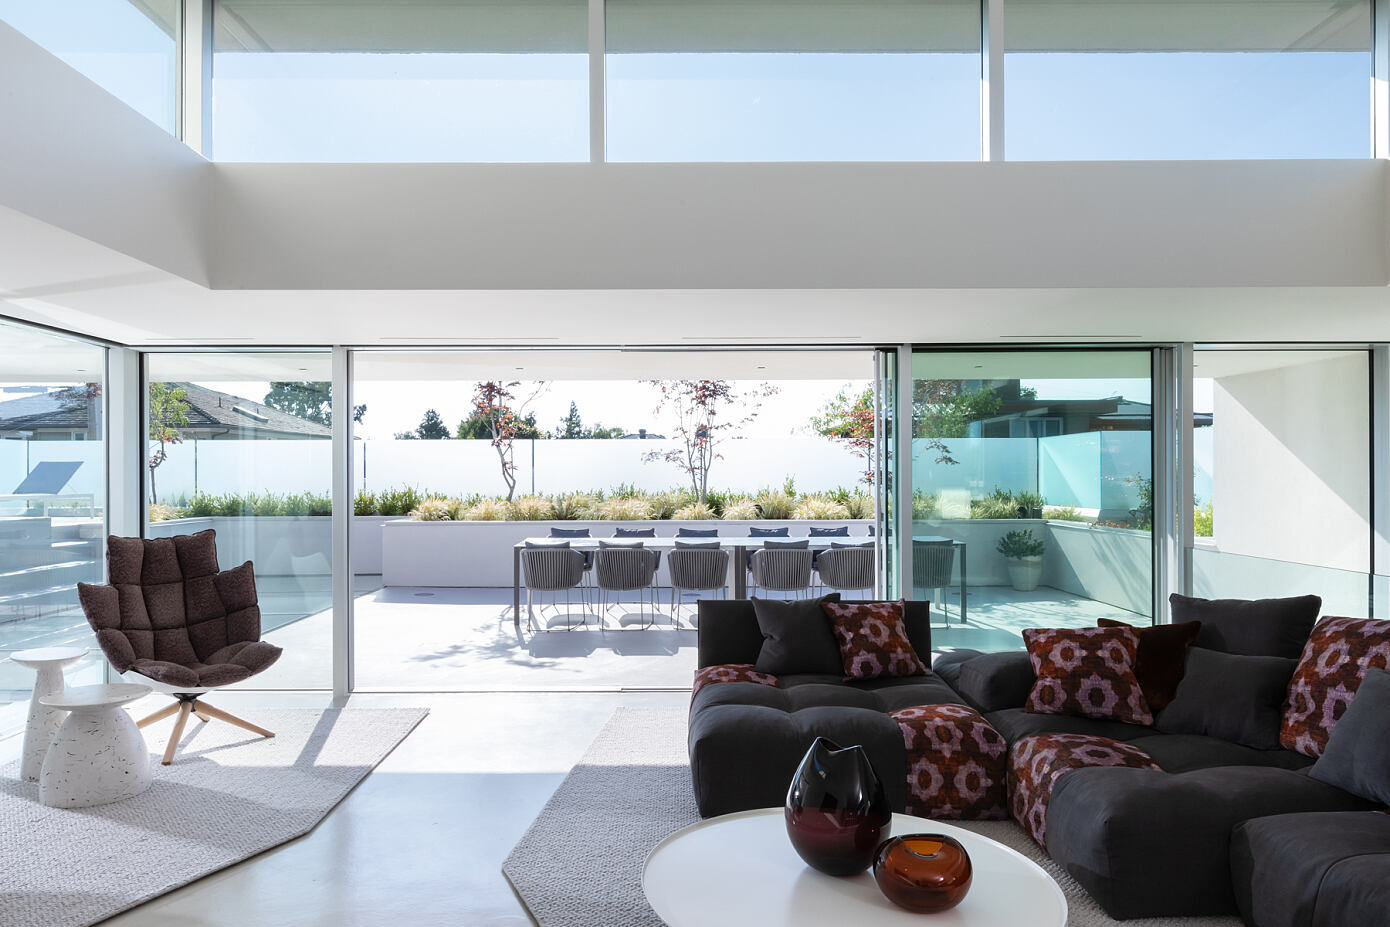 Boundary Bay Residence by Frits de Vries Architects